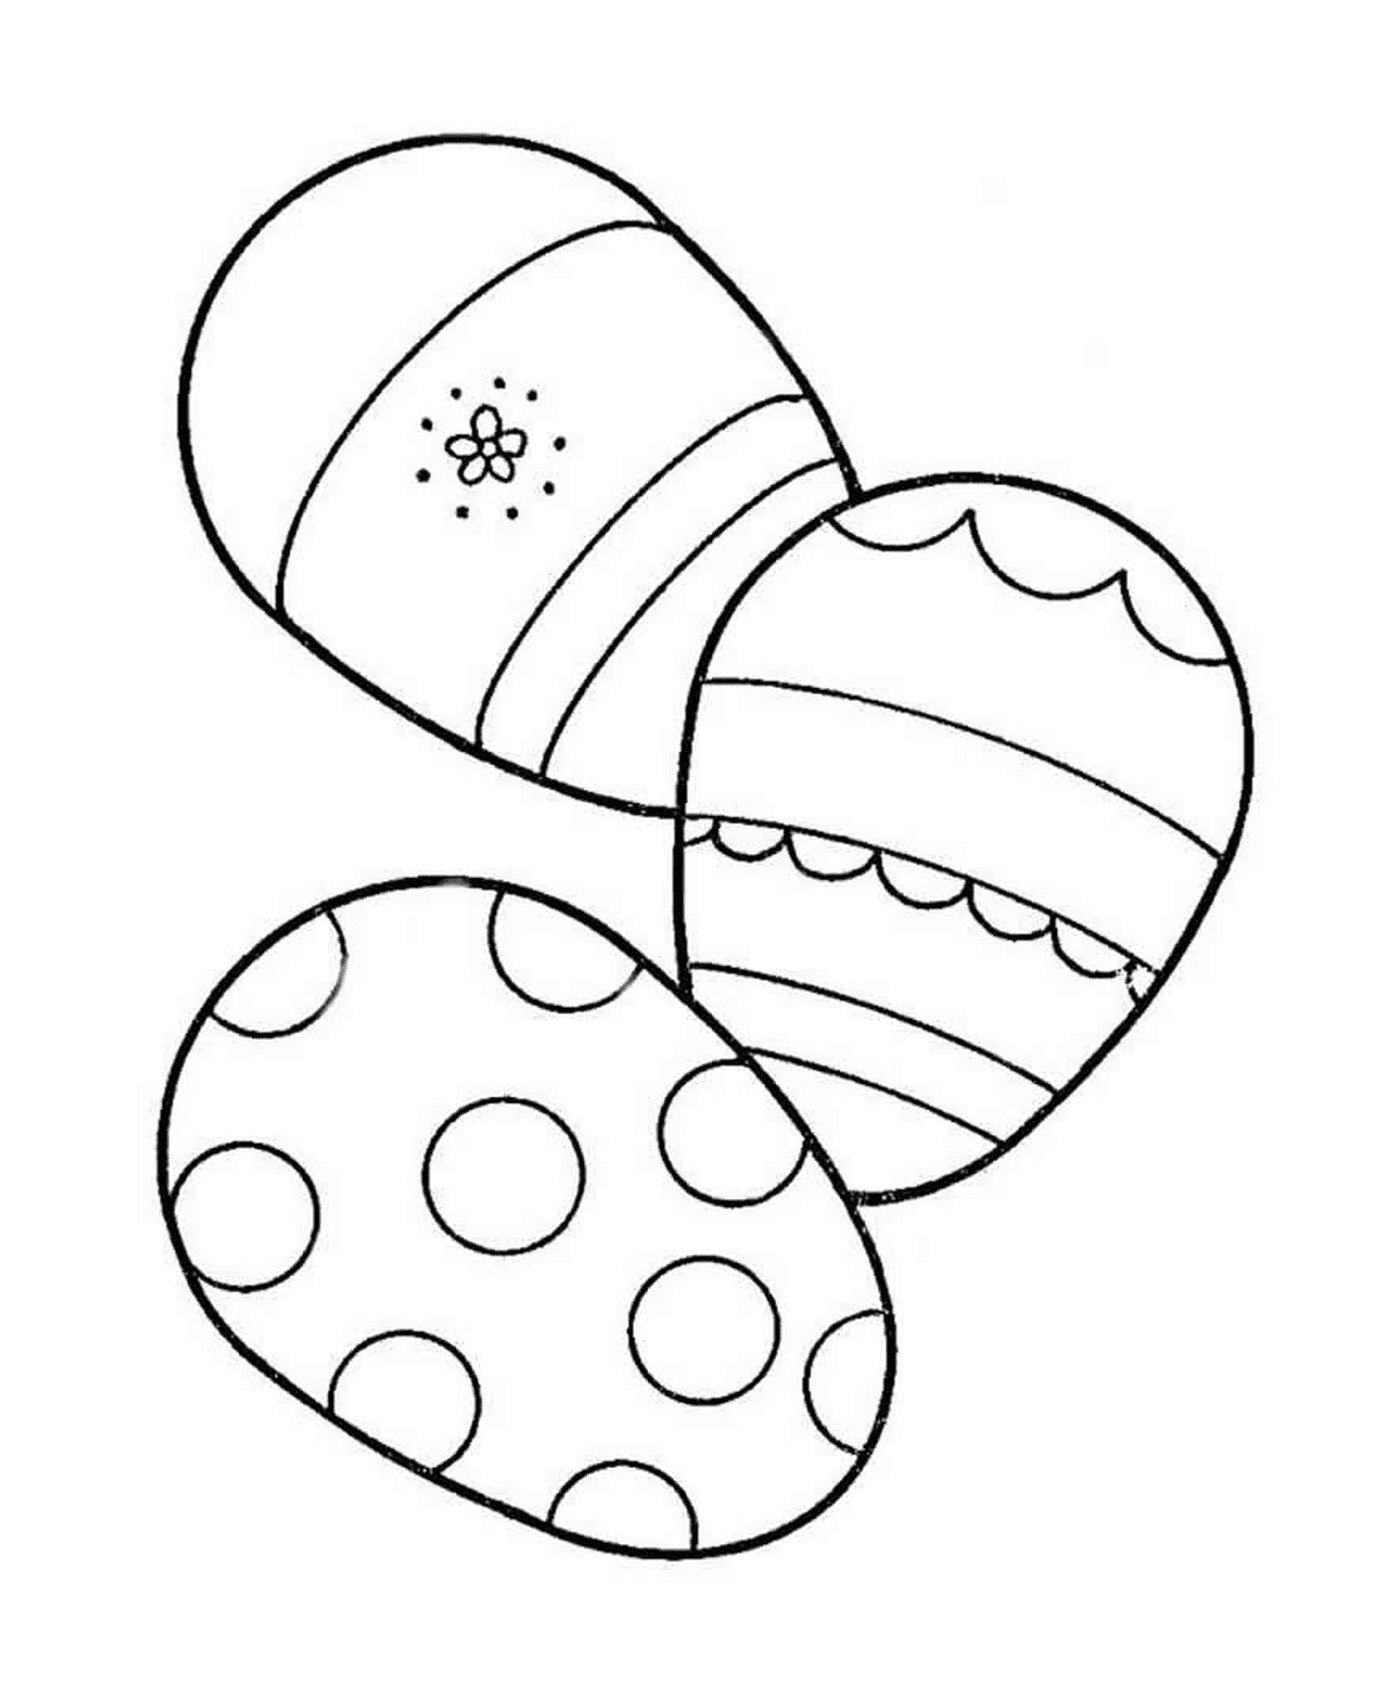  A group of three eggs drawn 